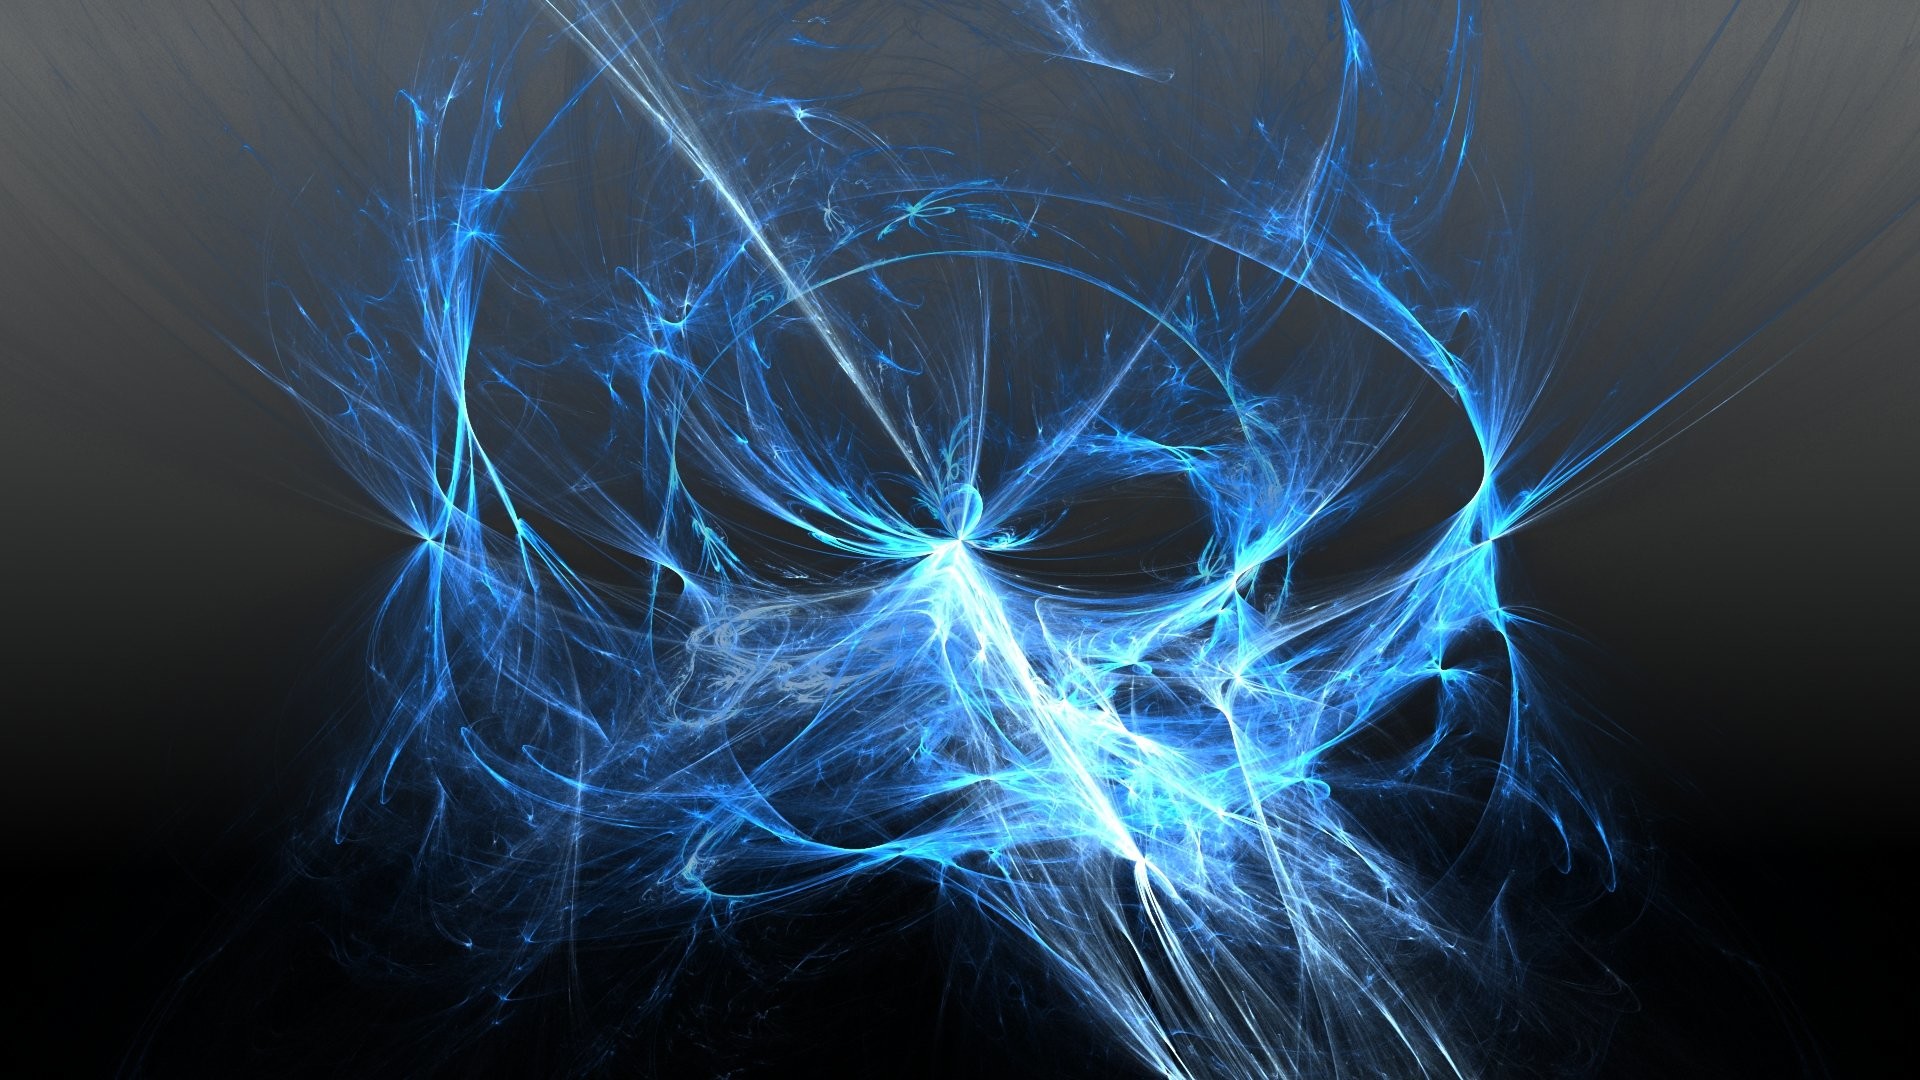 1920x1080 Blue Skull Live Wallpaper Android Apps on Google Play 1920Ã1080 Blue Flames  Wallpapers (